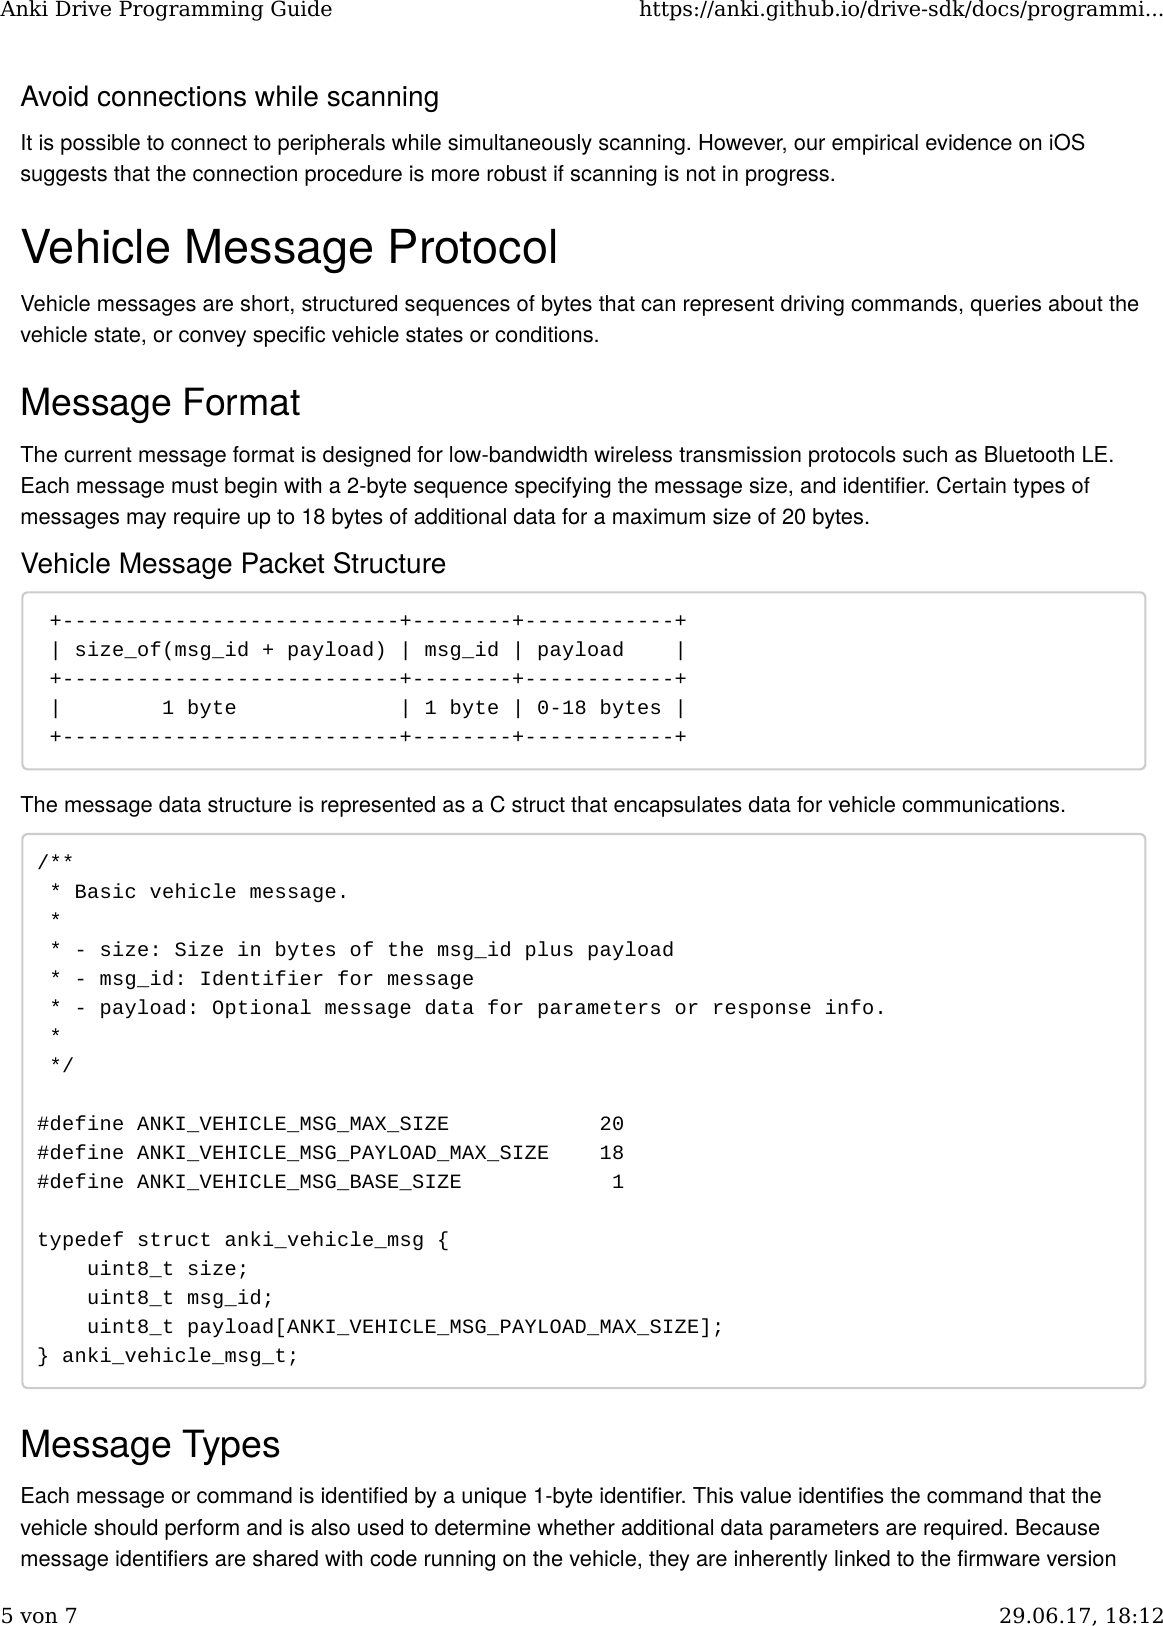 Page 5 of 7 - Anki-programming-guide